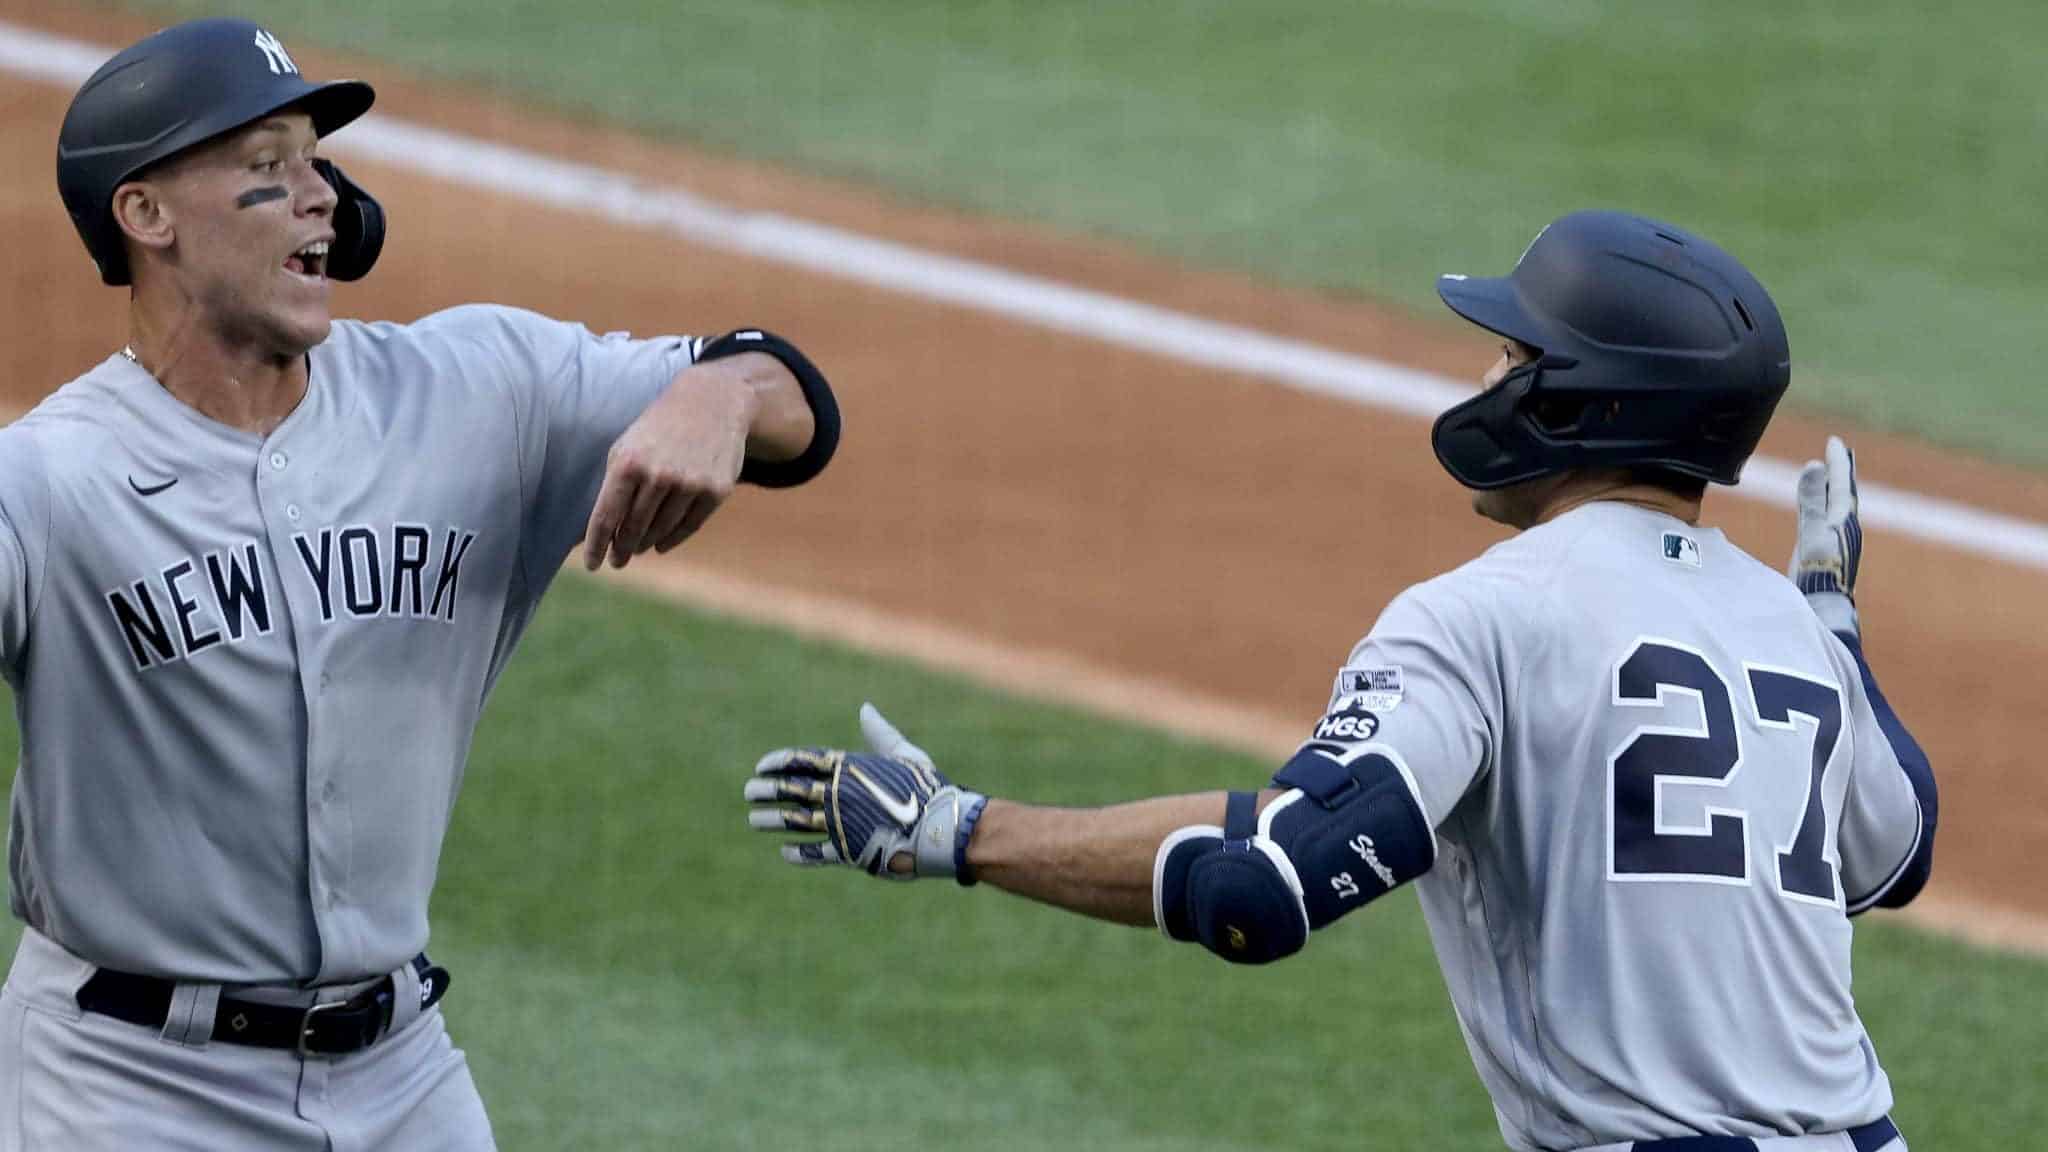 WASHINGTON, DC - JULY 23: Giancarlo Stanton #27 of the New York Yankees celebrates with Aaron Judge #99 after hitting a two run home run to center field against Max Scherzer #31 of the Washington Nationals during the first inning in the game at Nationals Park on July 23, 2020 in Washington, DC.